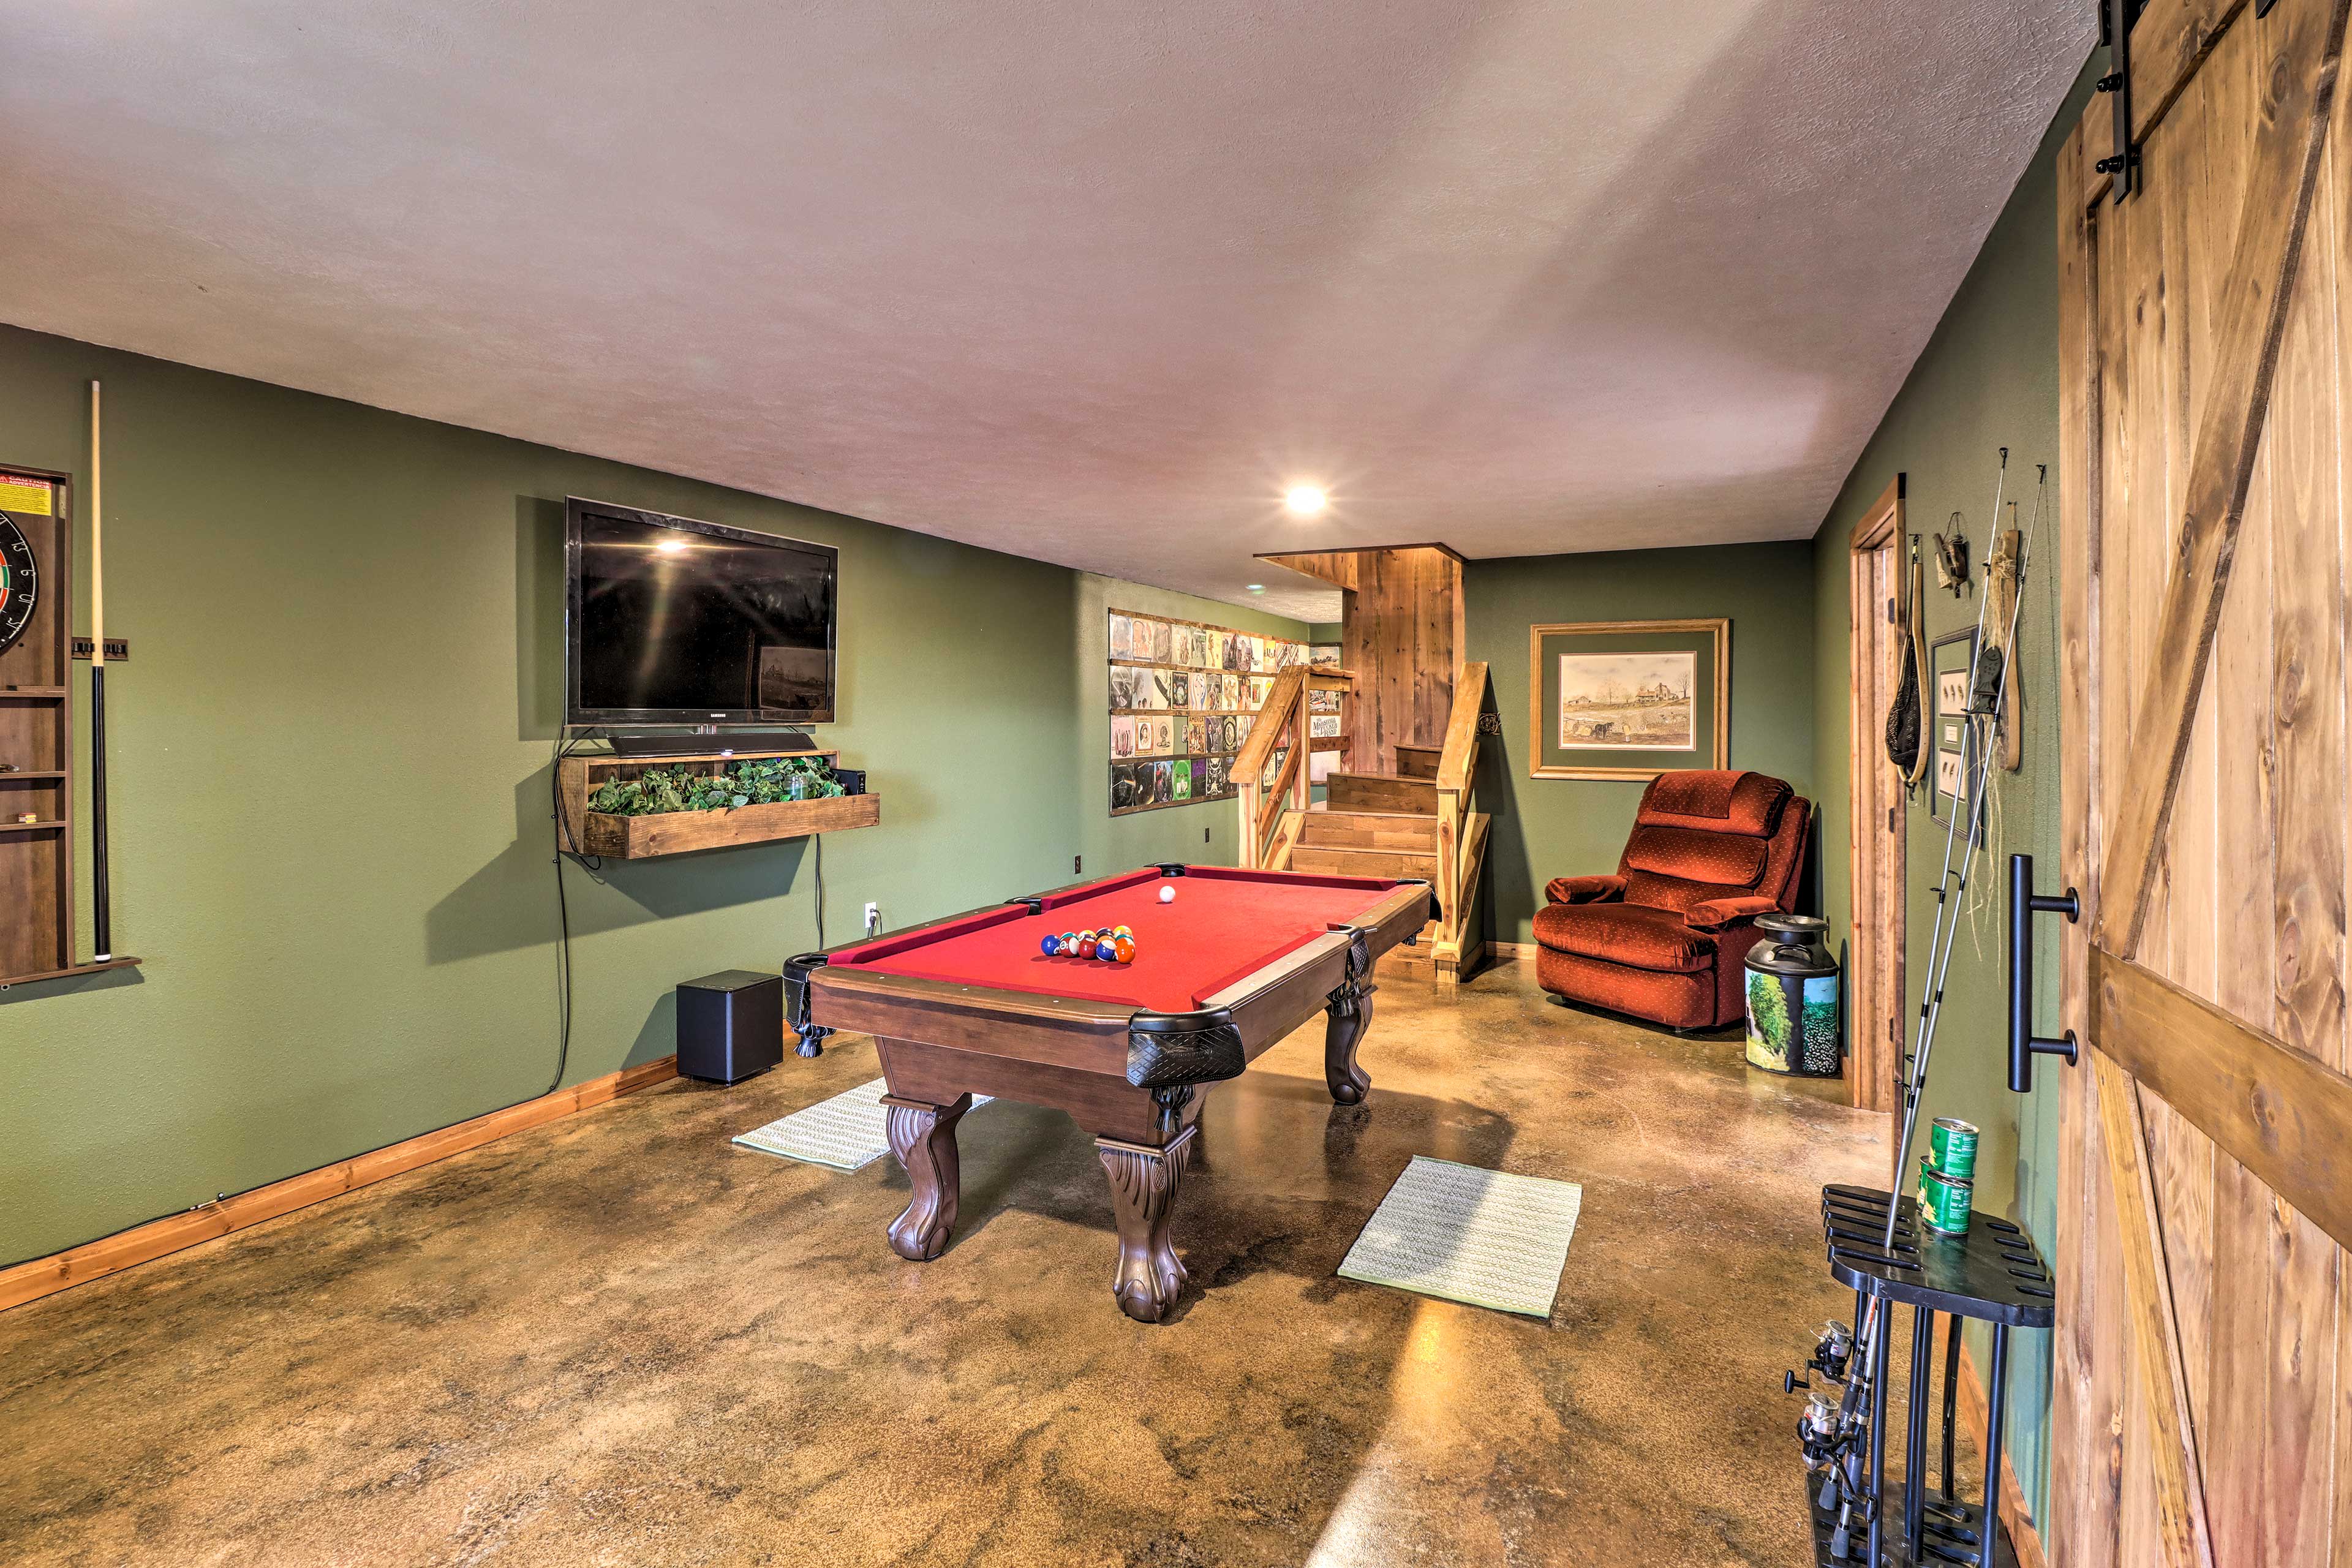 Game Room | WiFi Not Available | 1 Exterior Security Camera | Towels & Linens